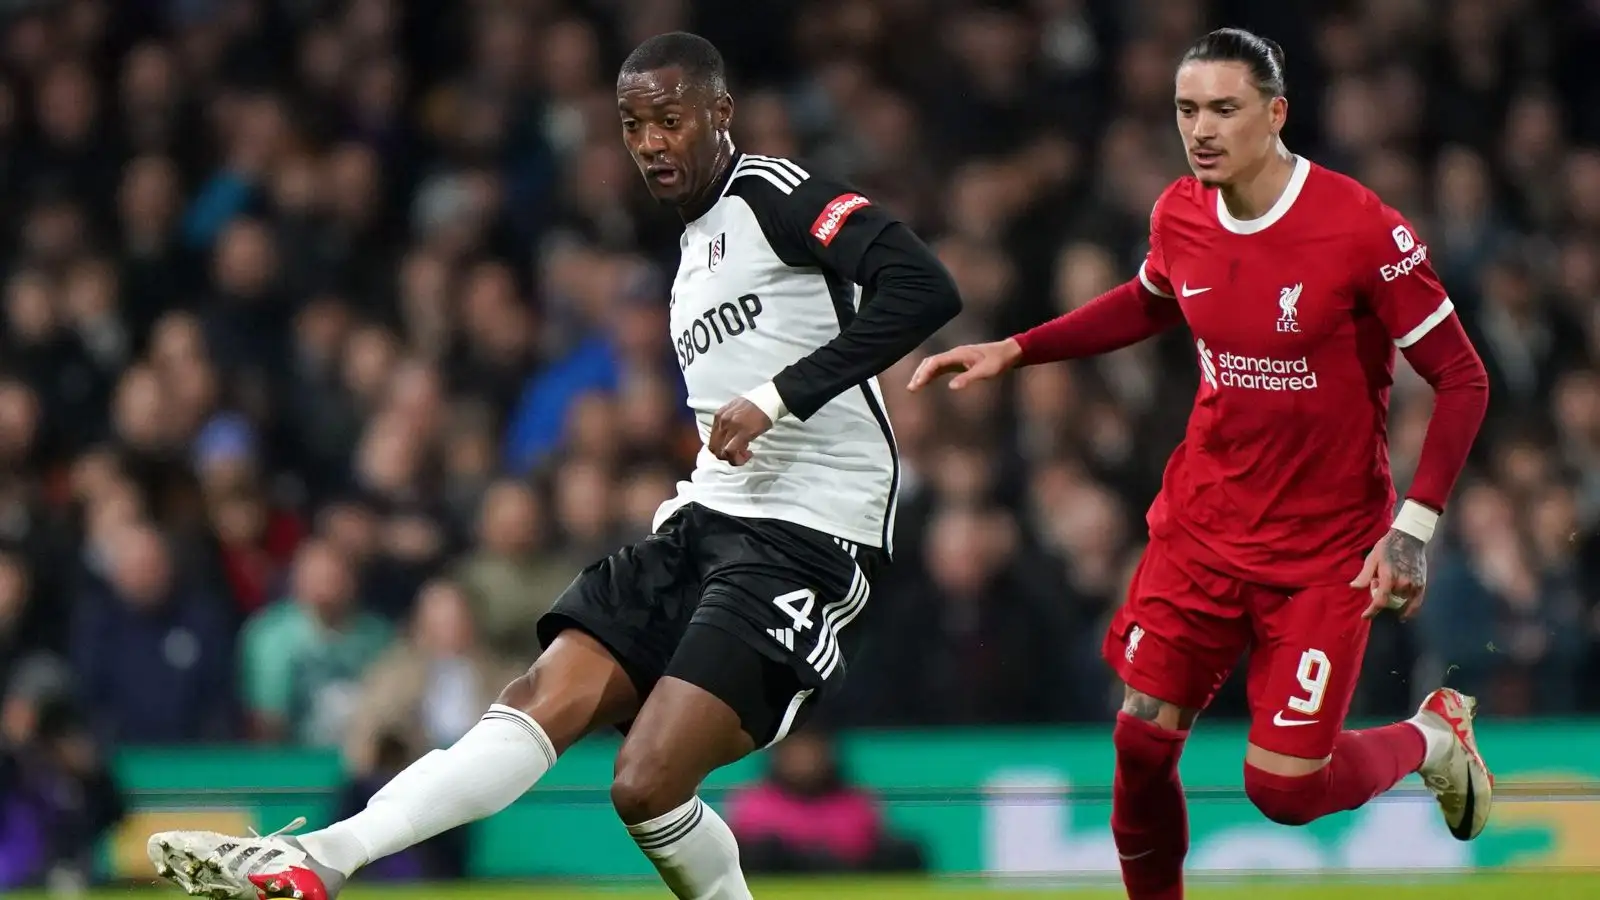 Fulham defender Tosin Adarabioyo throughout a match against Liverpool.